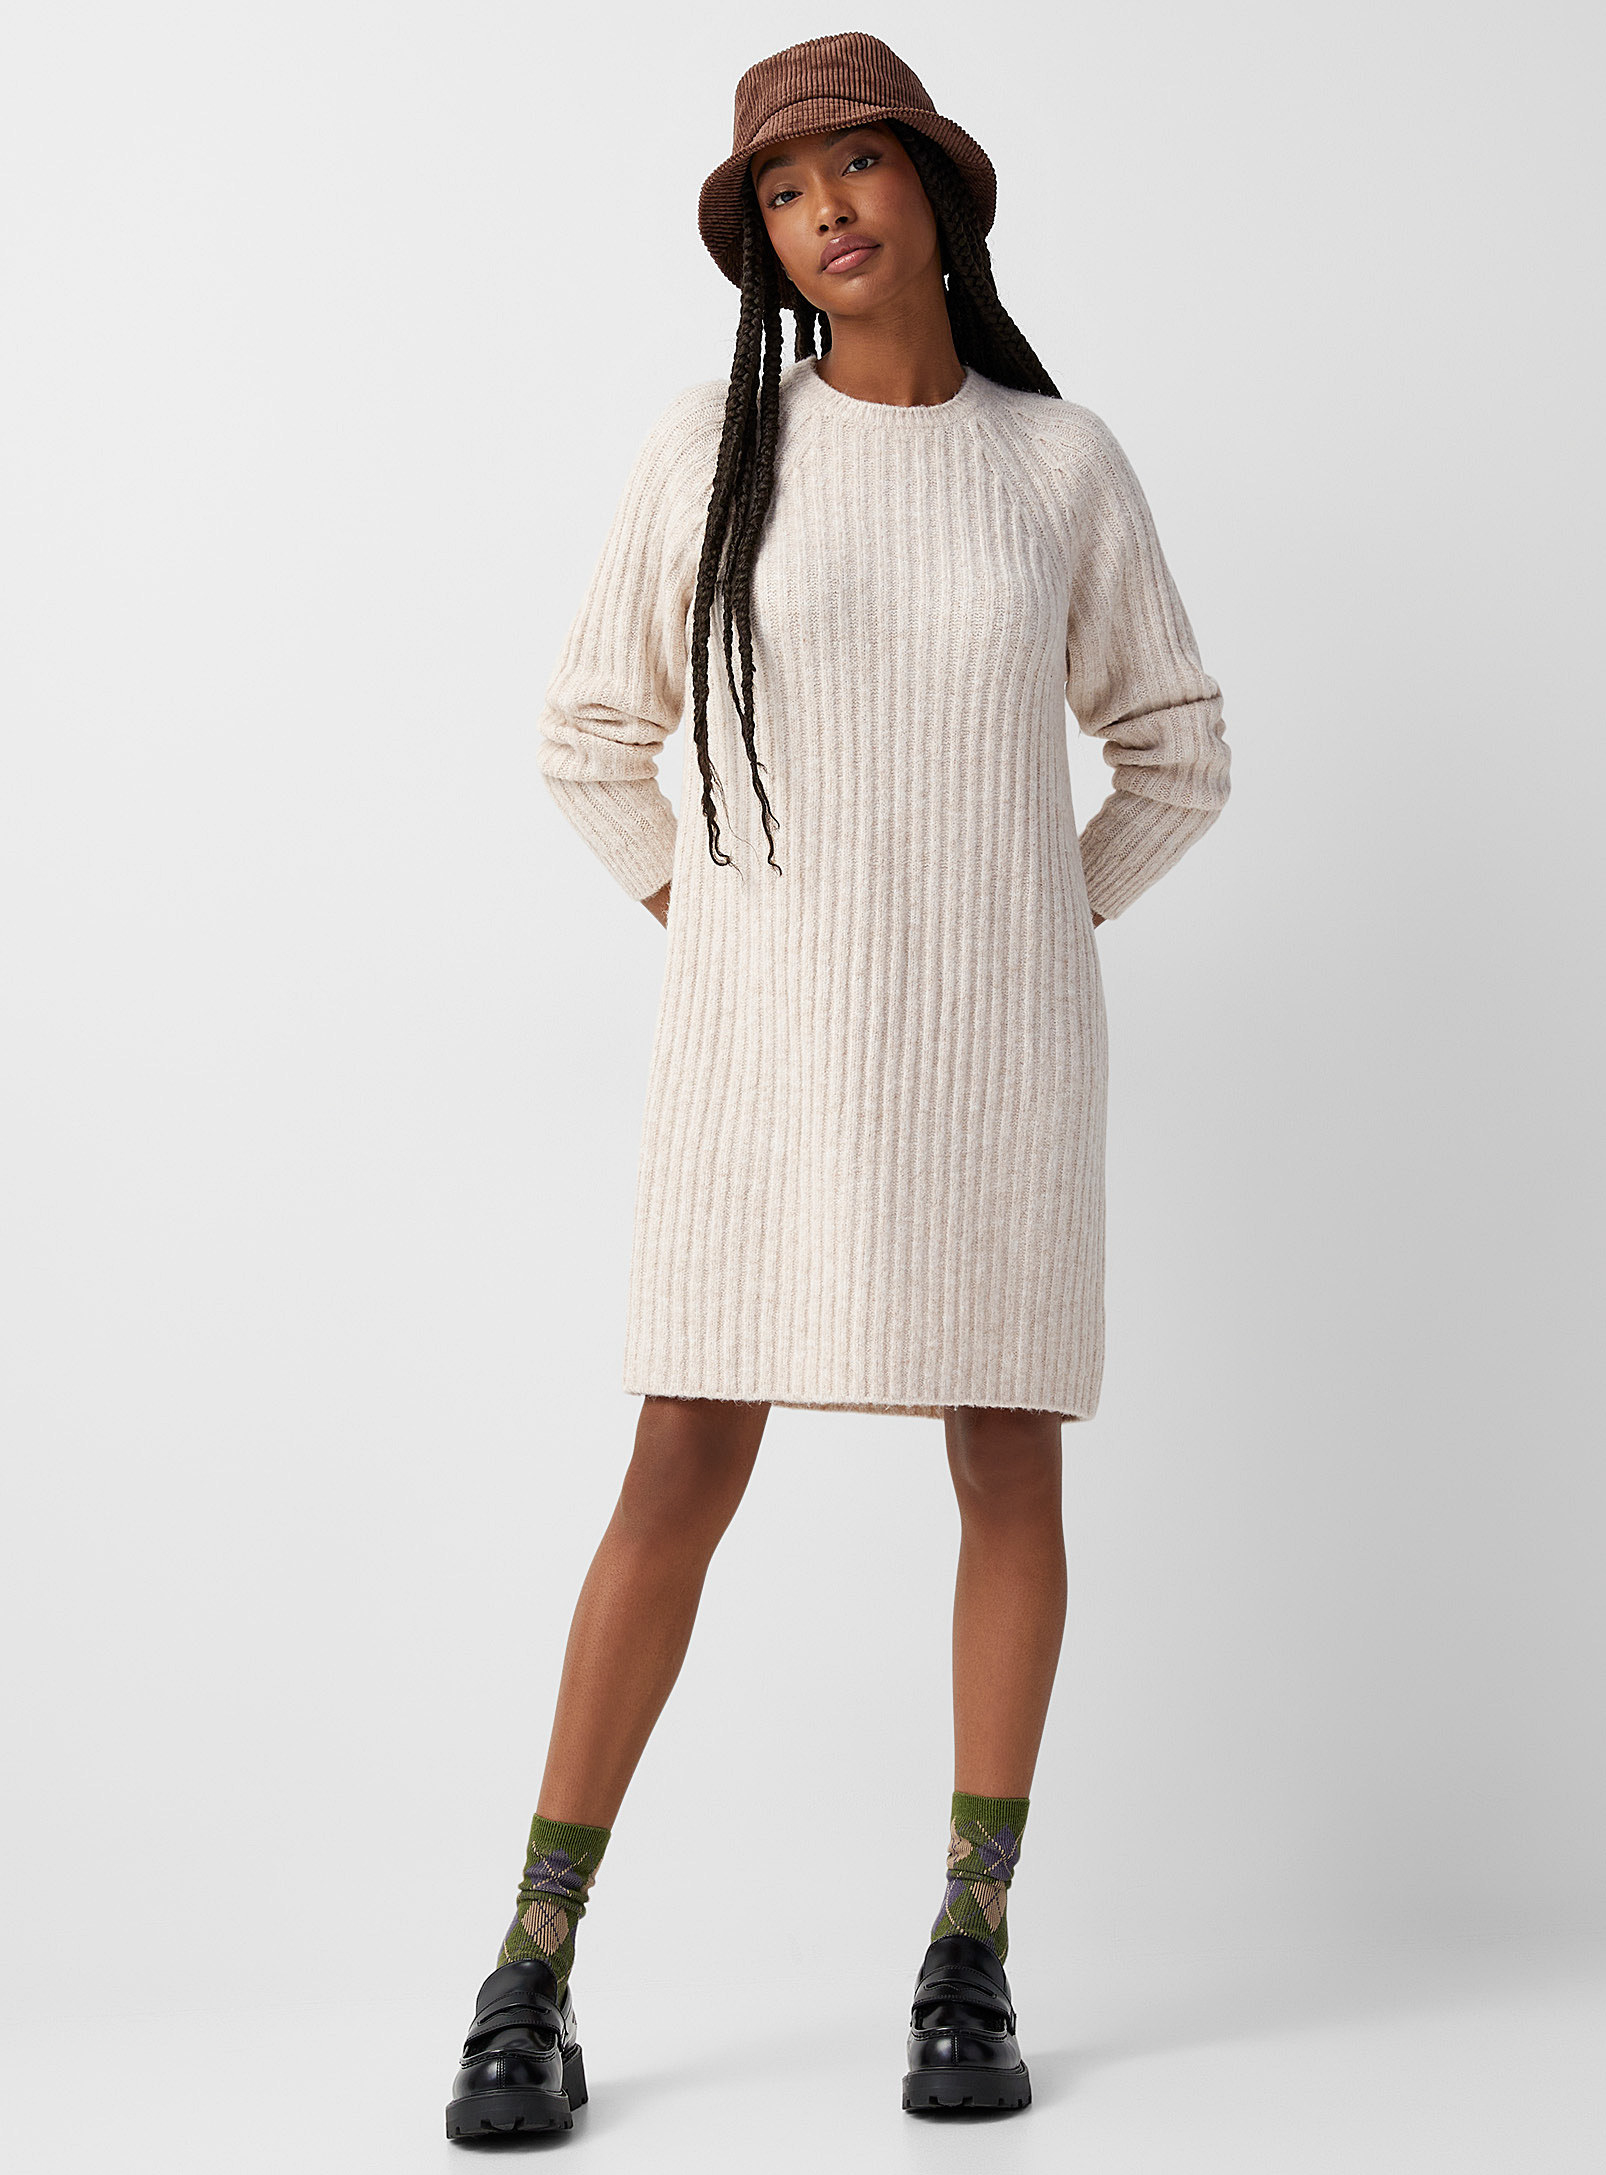 a person wearing the sweater dress with loafers and a corduroy bucket hat